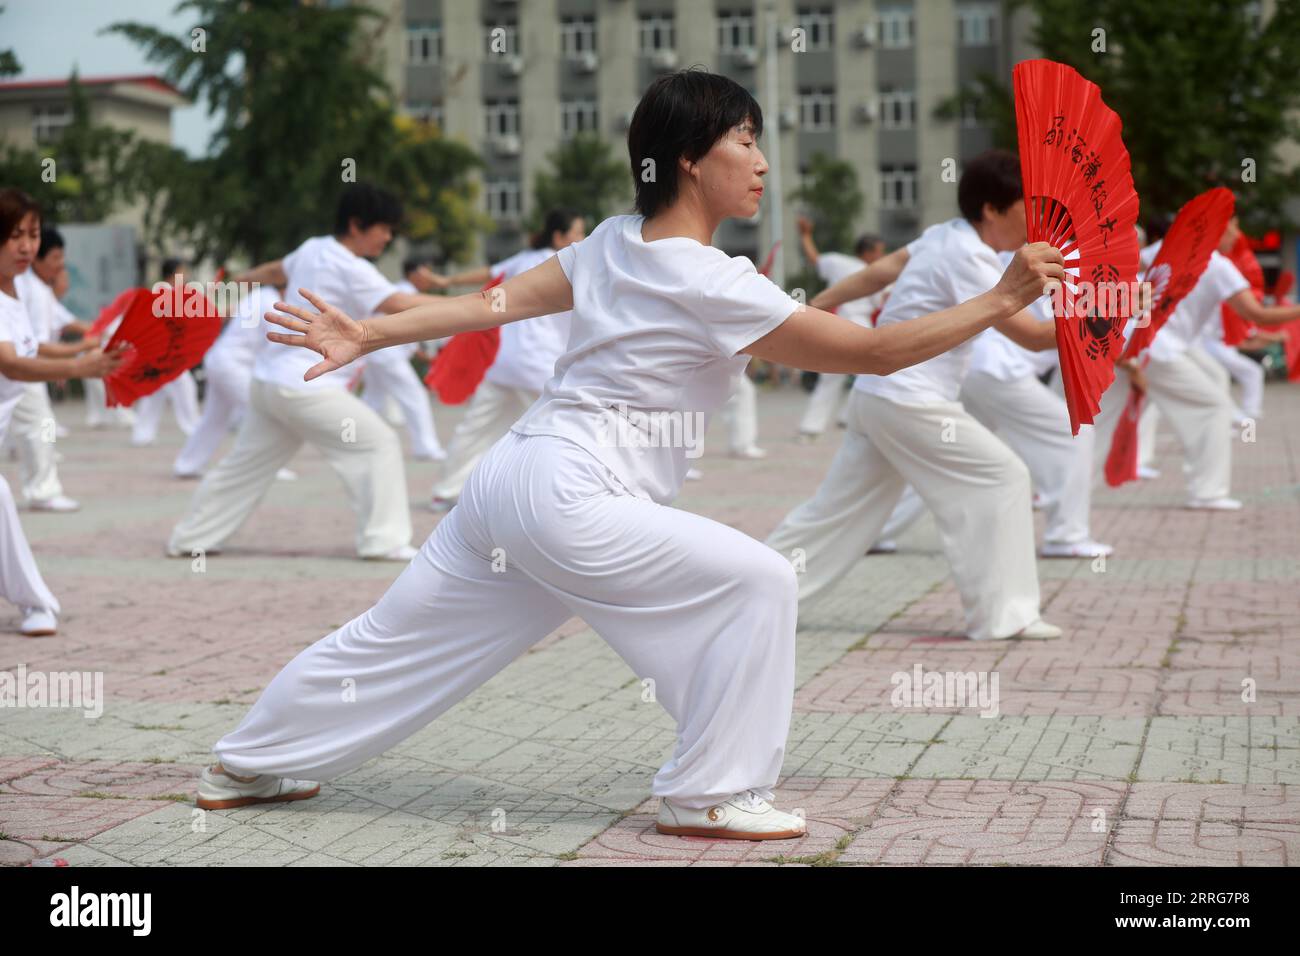 LUANNAN COUNTY, Hebei Province, China - August 8, 2020: People are practicing Tai Chi fans in the square Stock Photo